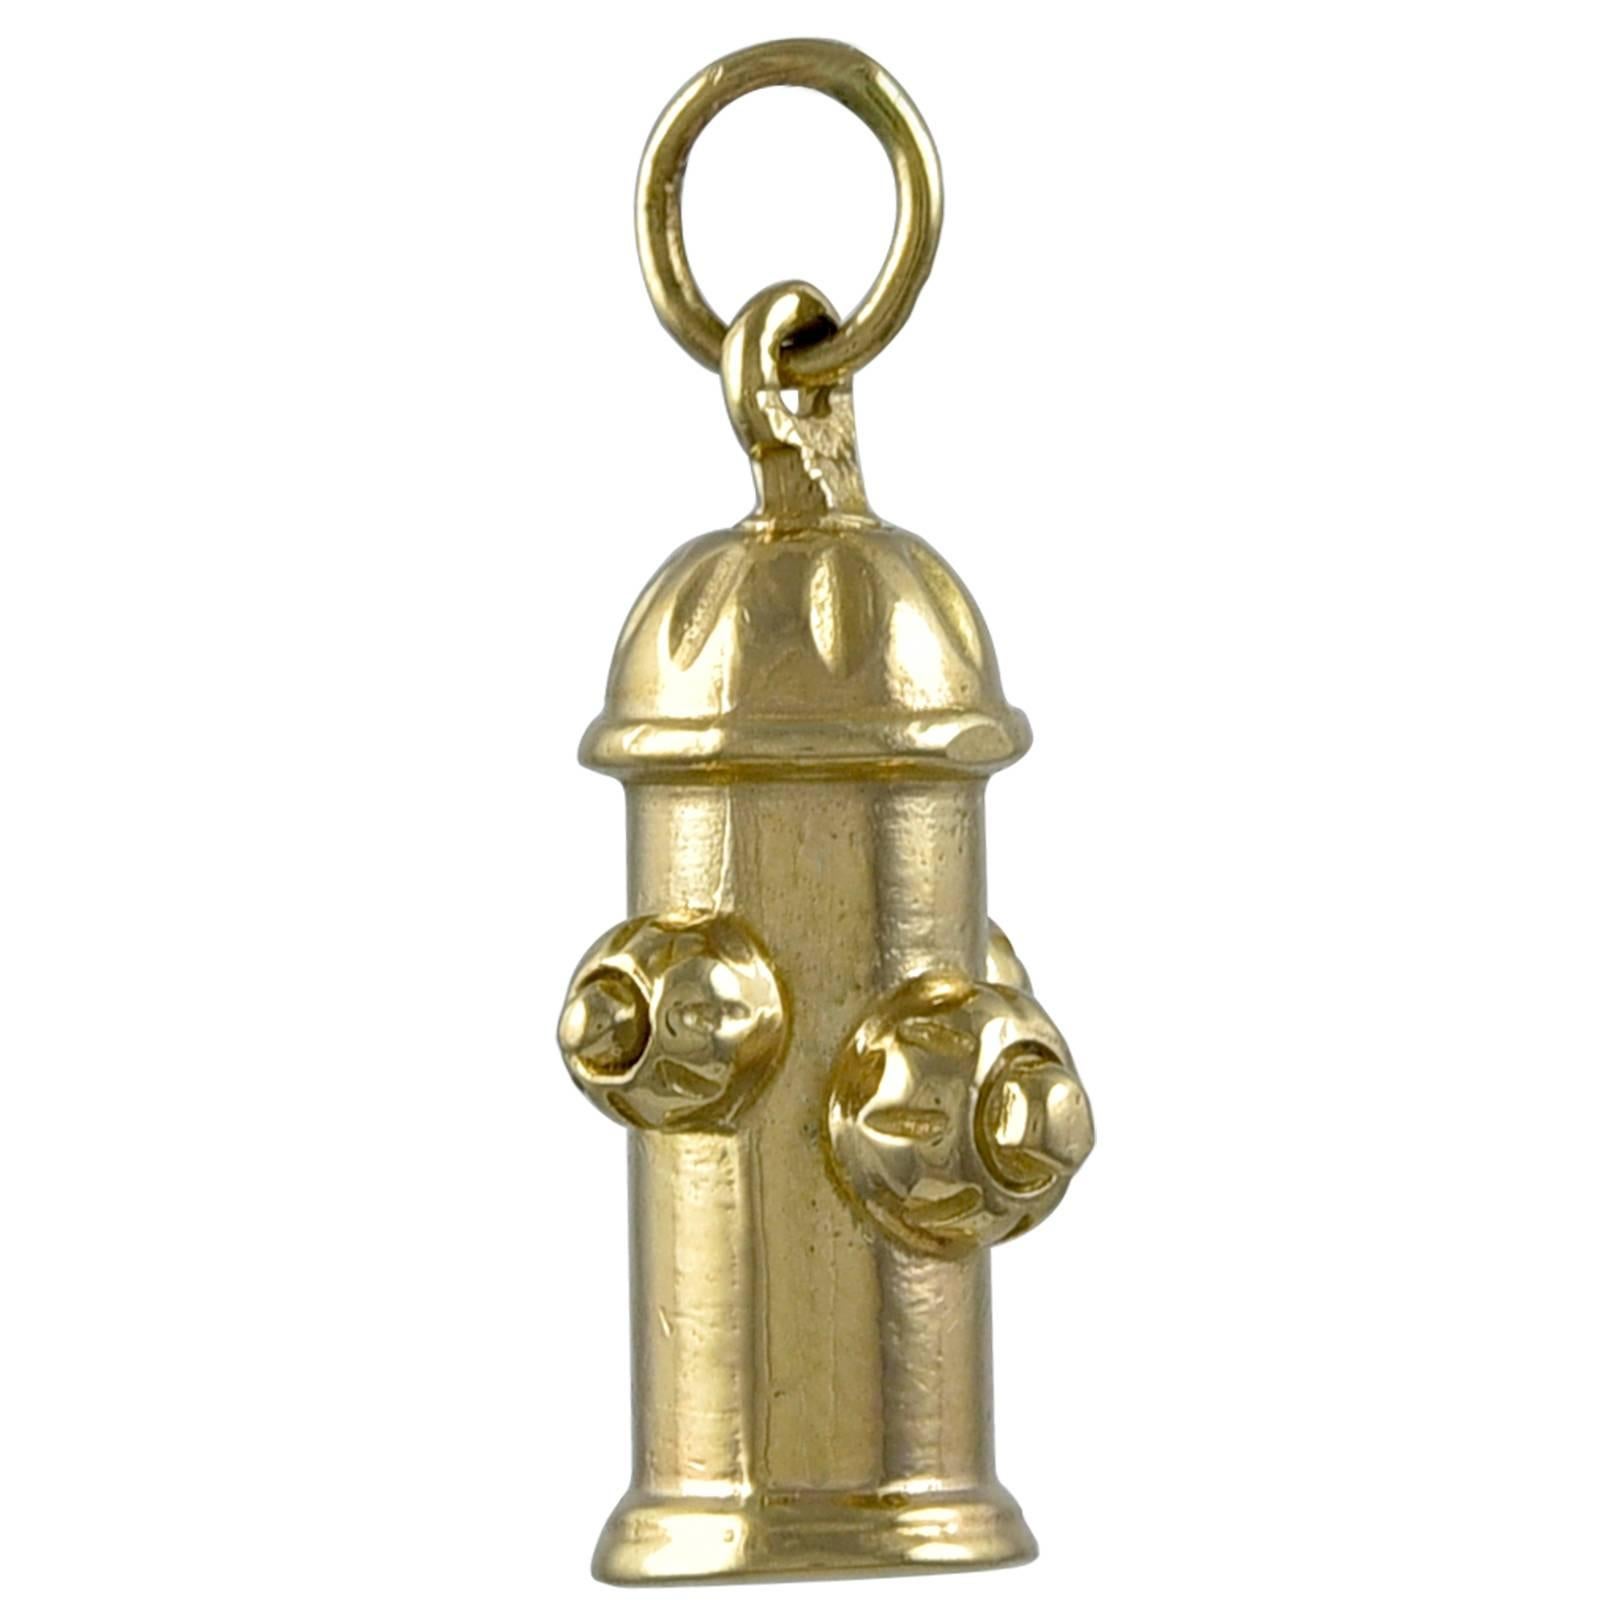 Fire Hydrant Gold Charm